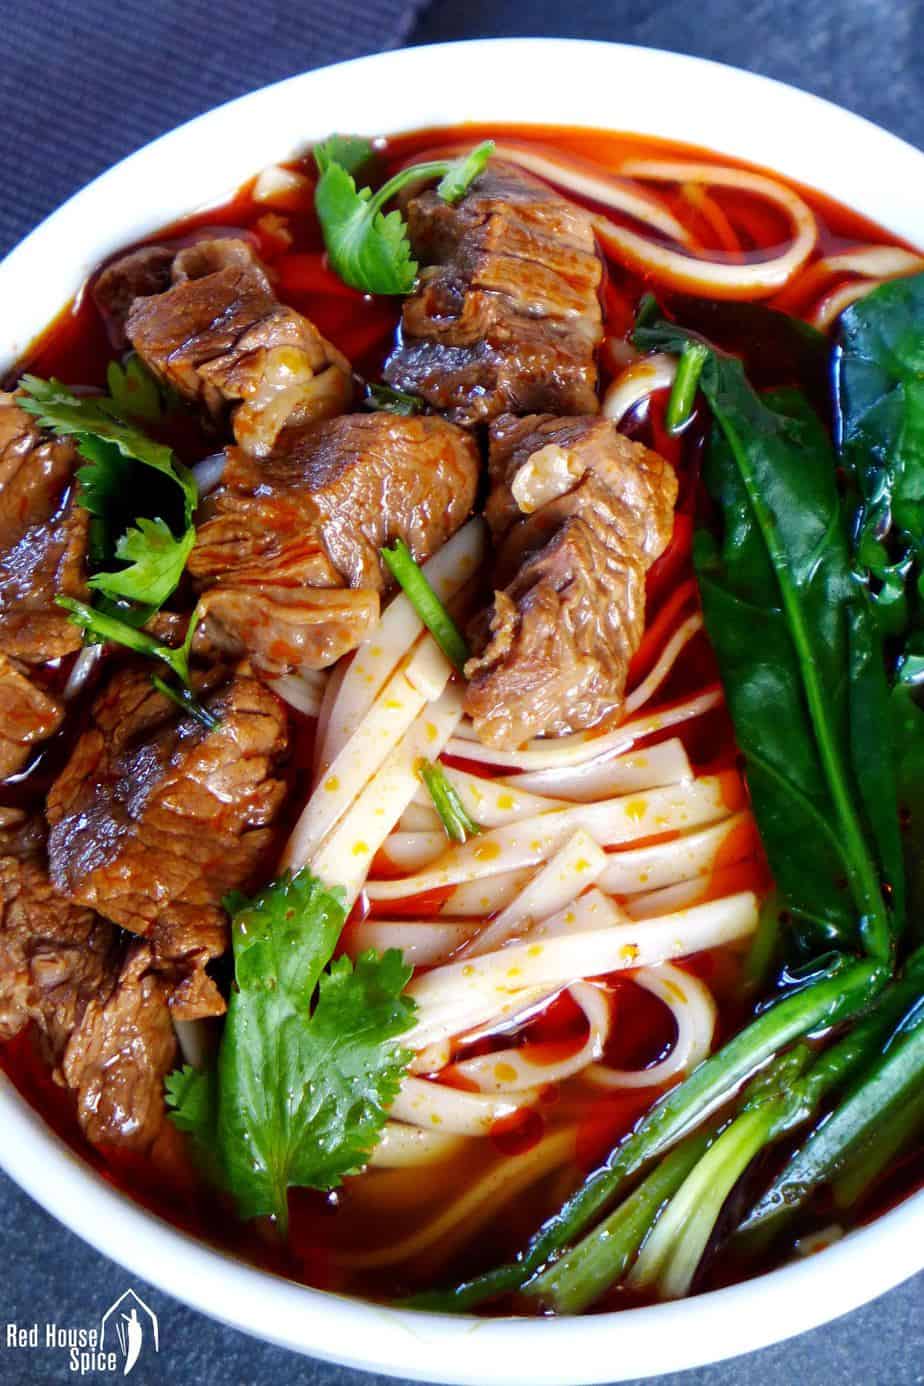 Spicy beef noodle soup: freshly cooked noodles in a spicy broth, topped with beef cubes, garnished with spinach and coriander.